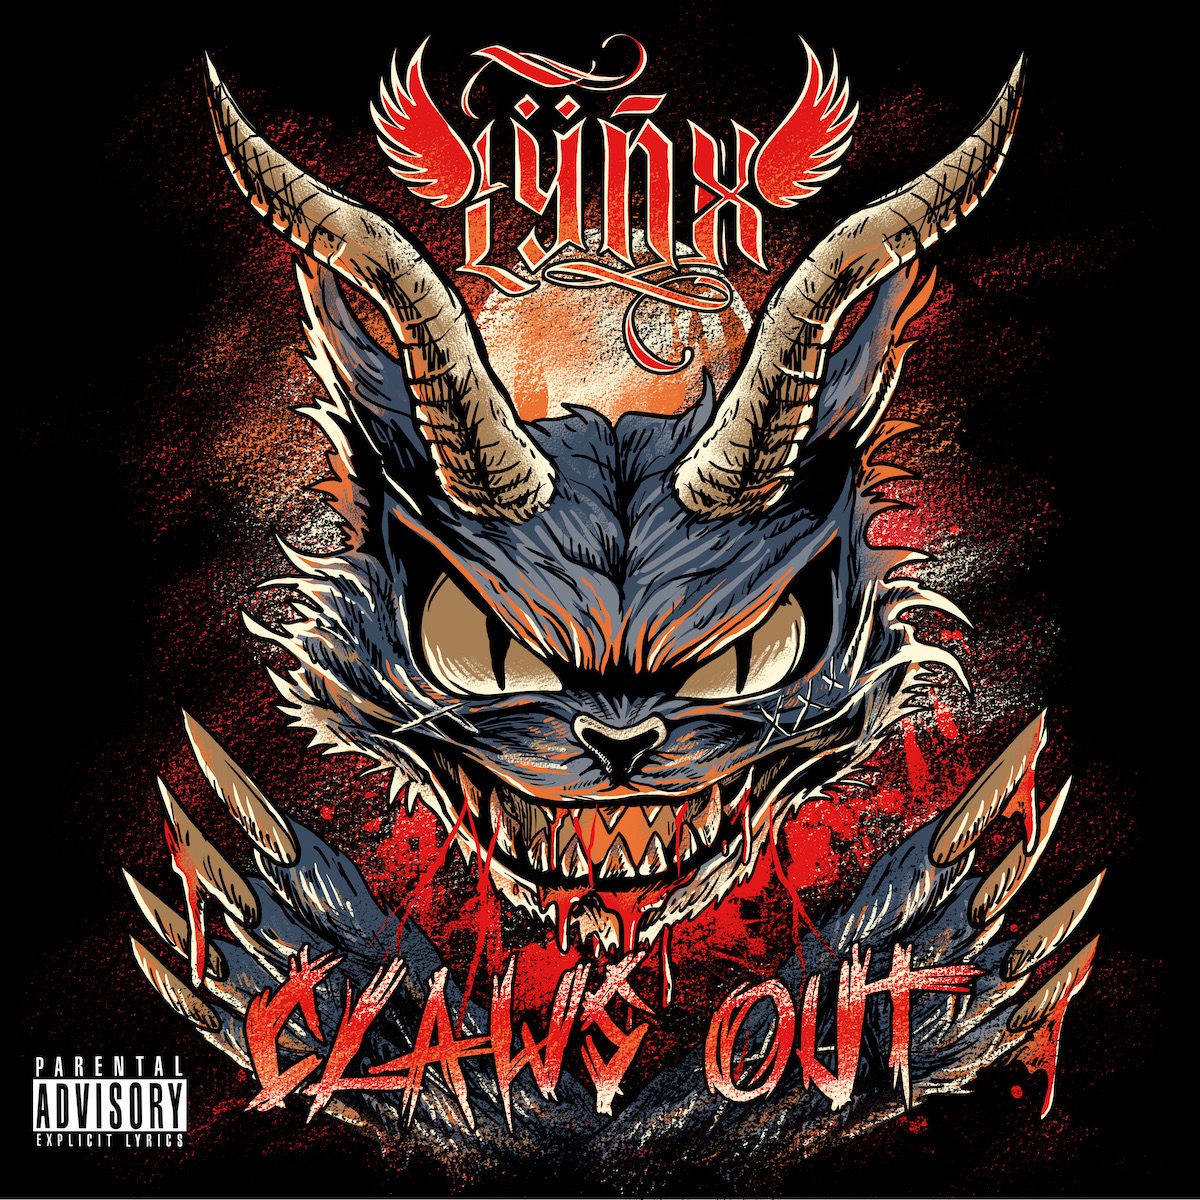 ALBUM REVIEW: Claws Out by Lÿnx